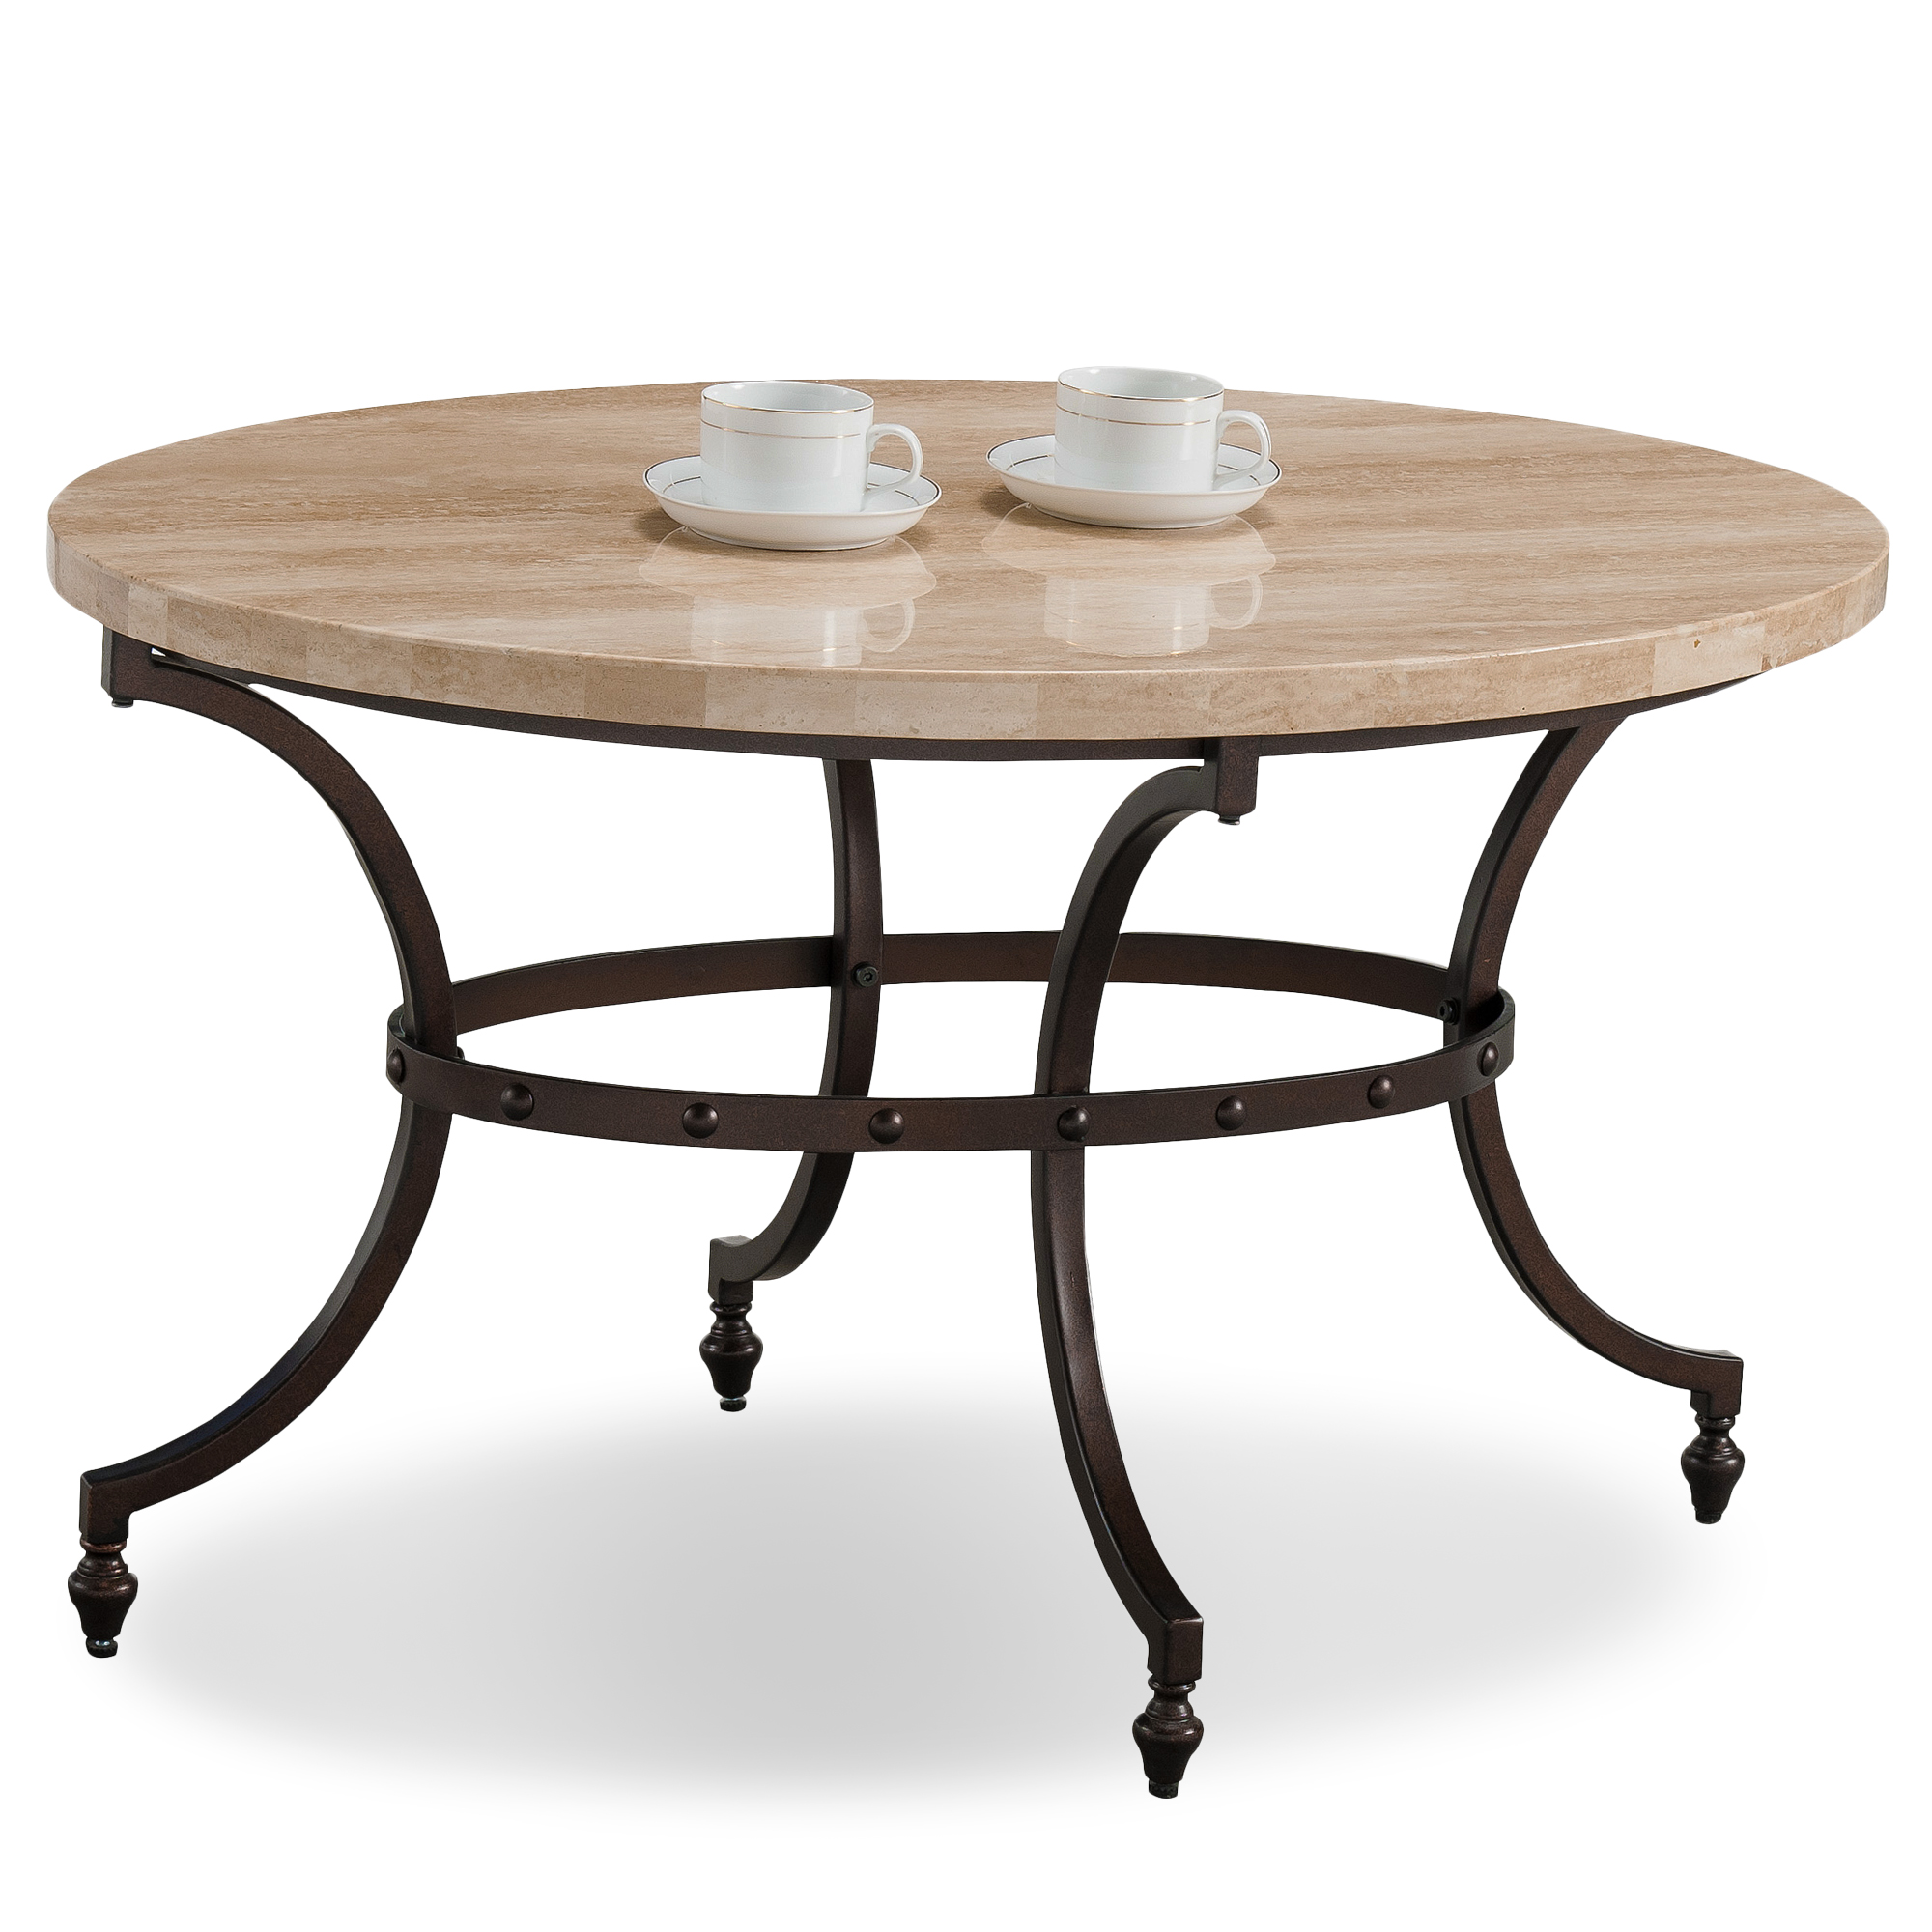 Oval Travertine Stone Top Coffee Table with Rubbed Bronze ...